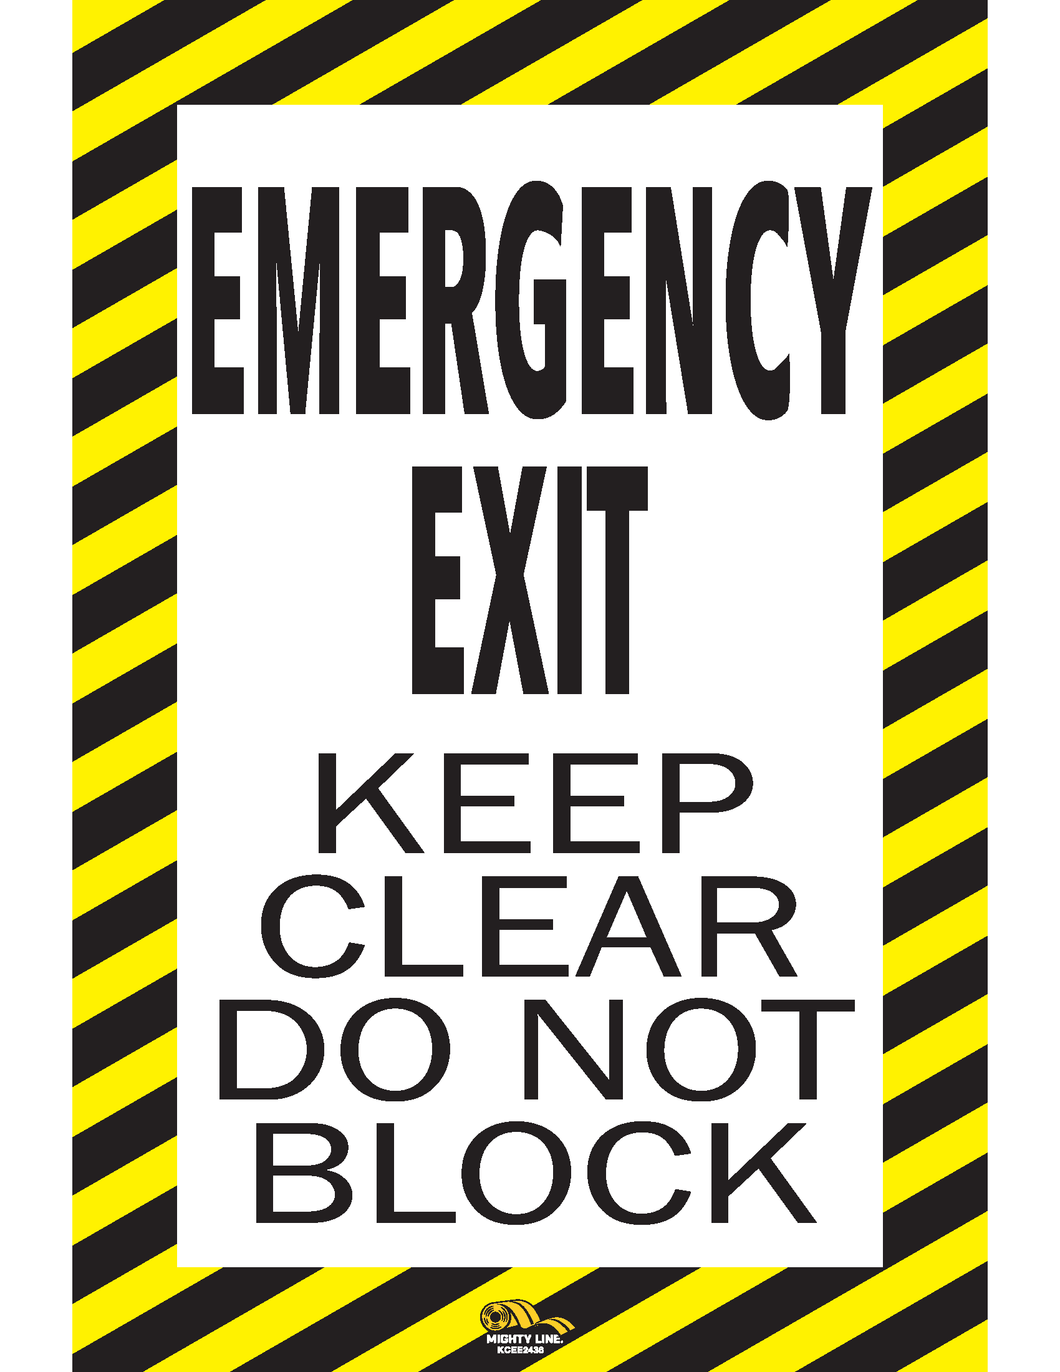 EMERGENCY EXIT KEEP CLEAR DO NOT BLOCK, 24x36